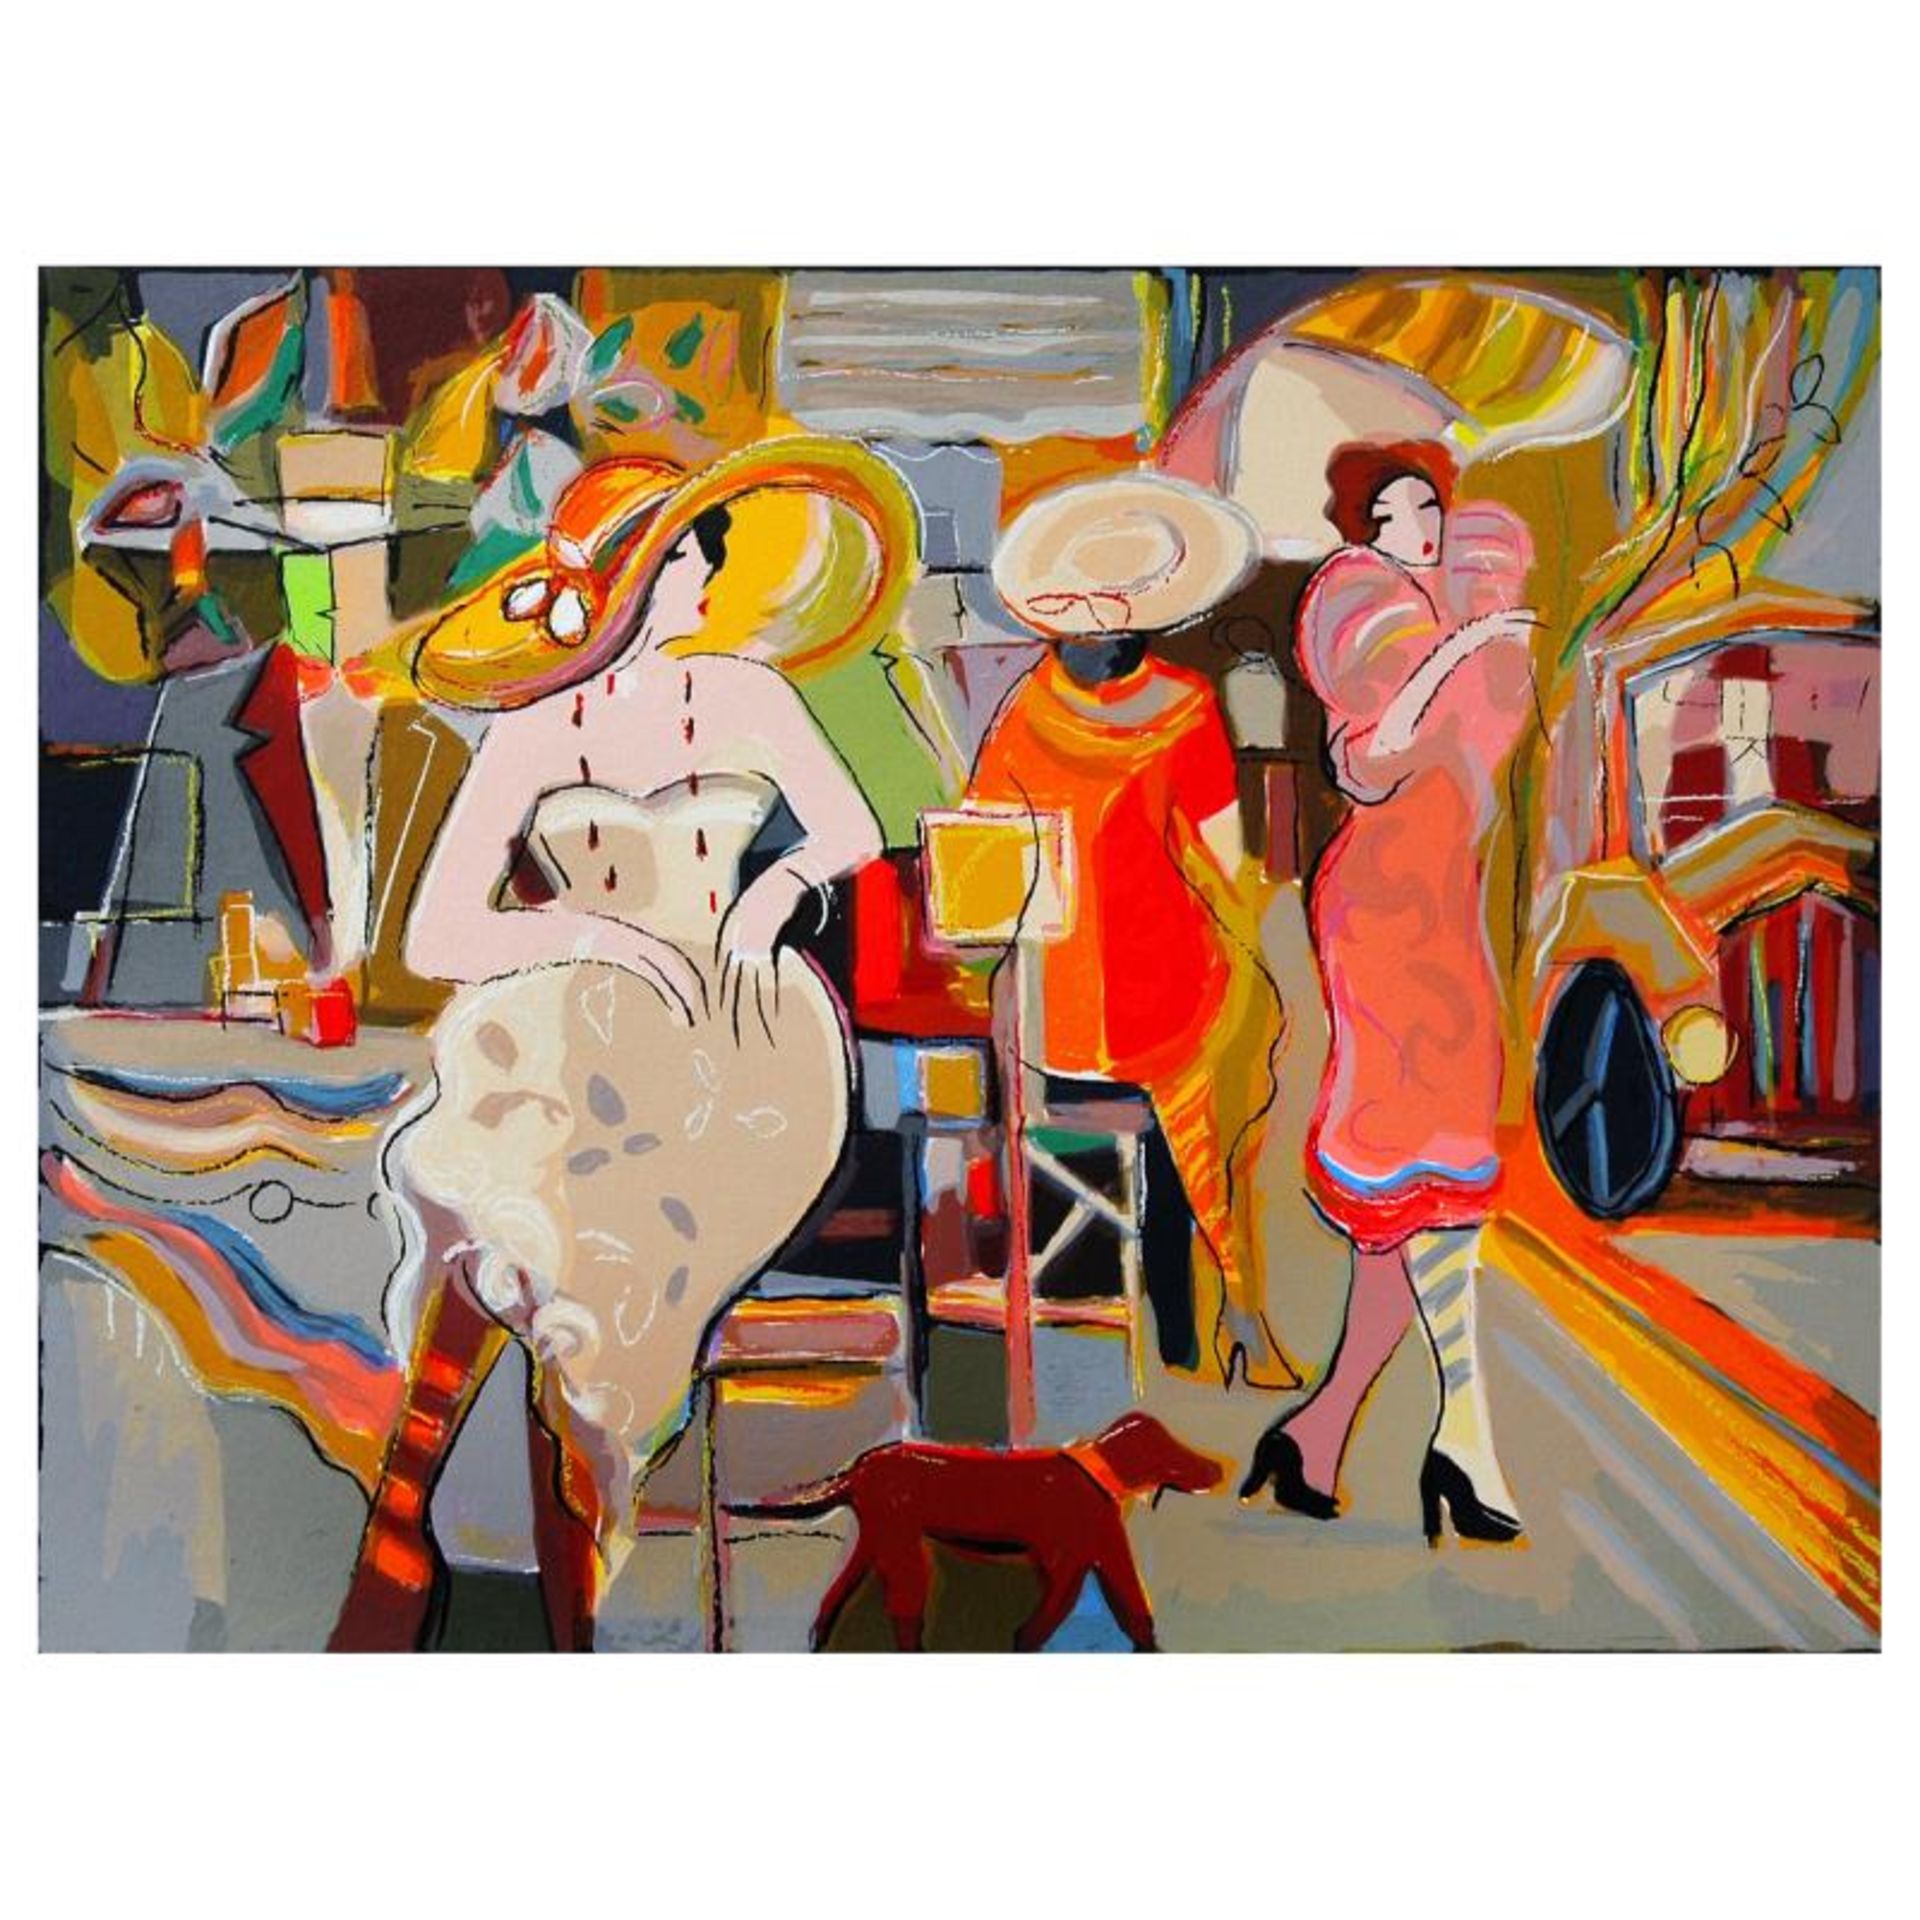 Isaac Maimon, "Elite Boulevard" Limited Edition Serigraph, Numbered and Hand Sig